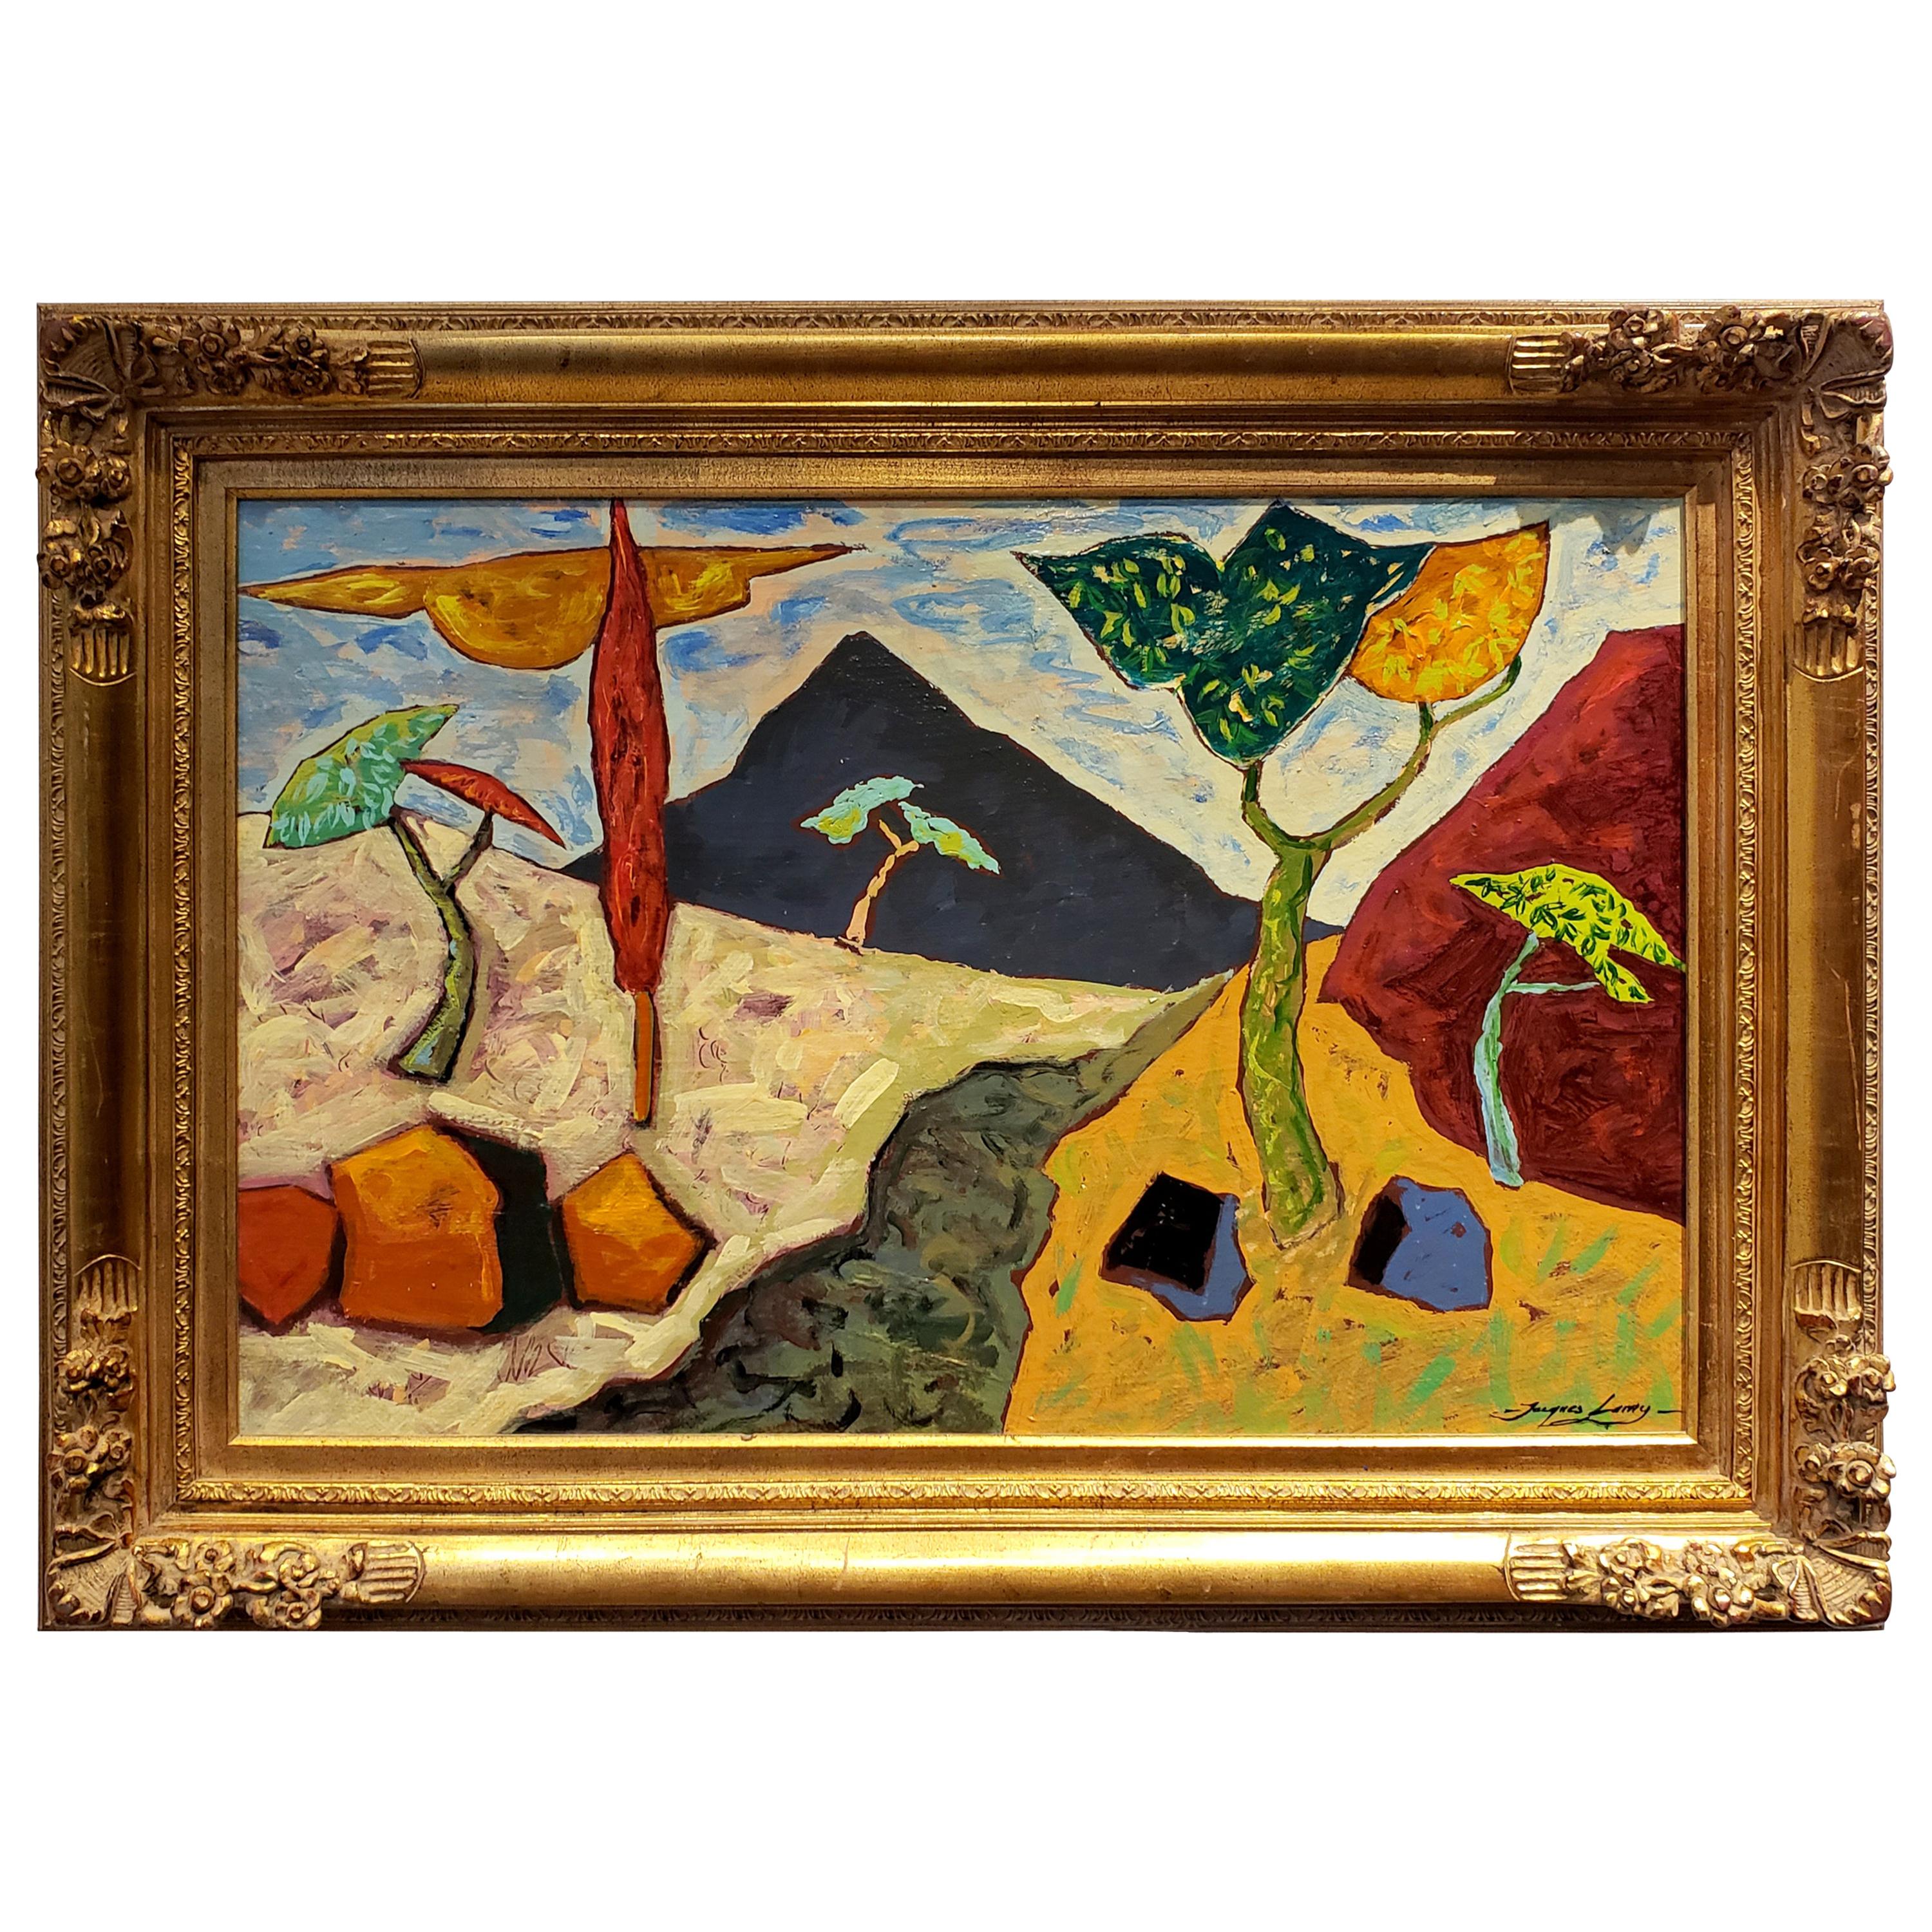 Bright Surreal Landscape "Arroyo" by Artist Jacques Lamy For Sale